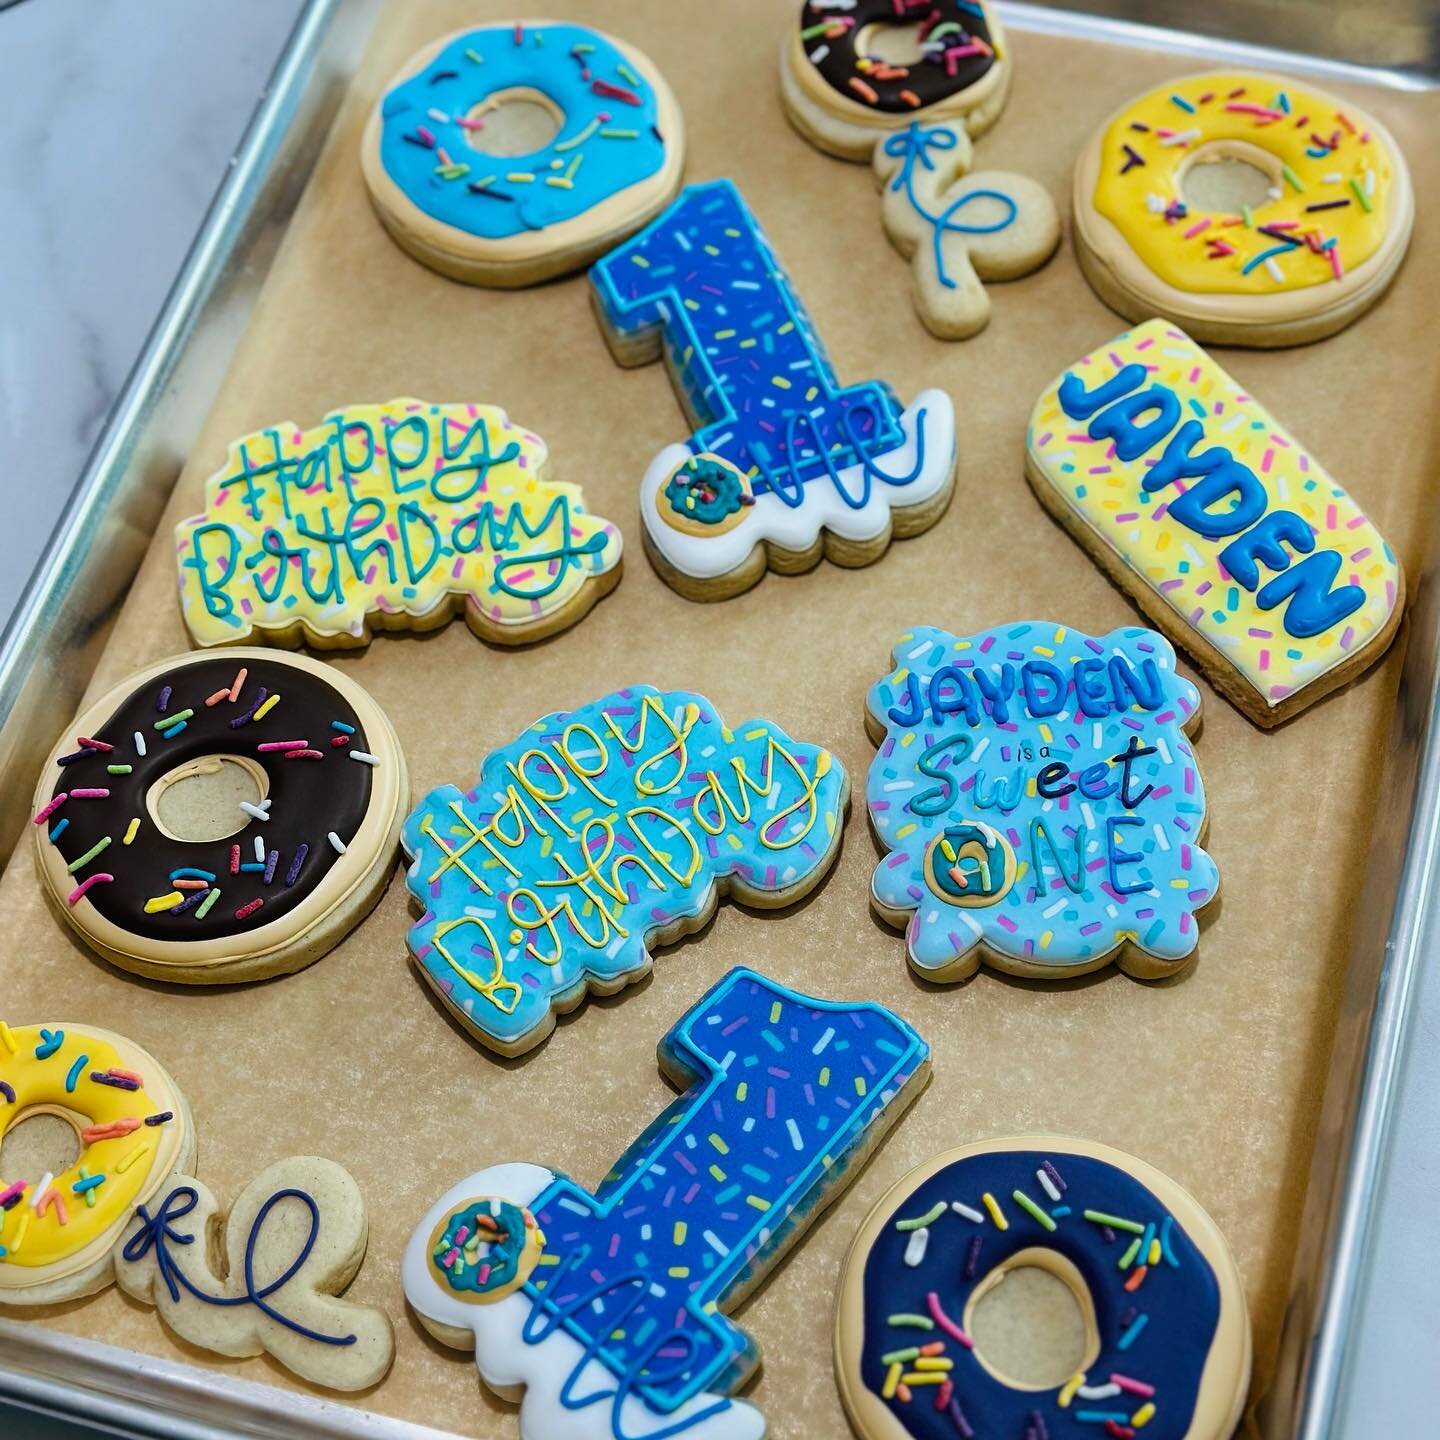 Is it a cookie or a donut? Why not both! Happy first birthday to Jayden, who is obviously a sweet one. #SugarCookies #Homemade #RoyalIcing #CustomCookies #HandDecoratedCookies #DecoratedCookies #DecoratedSugarCookies #CookieArt #EdibleArt #CookiesOfI